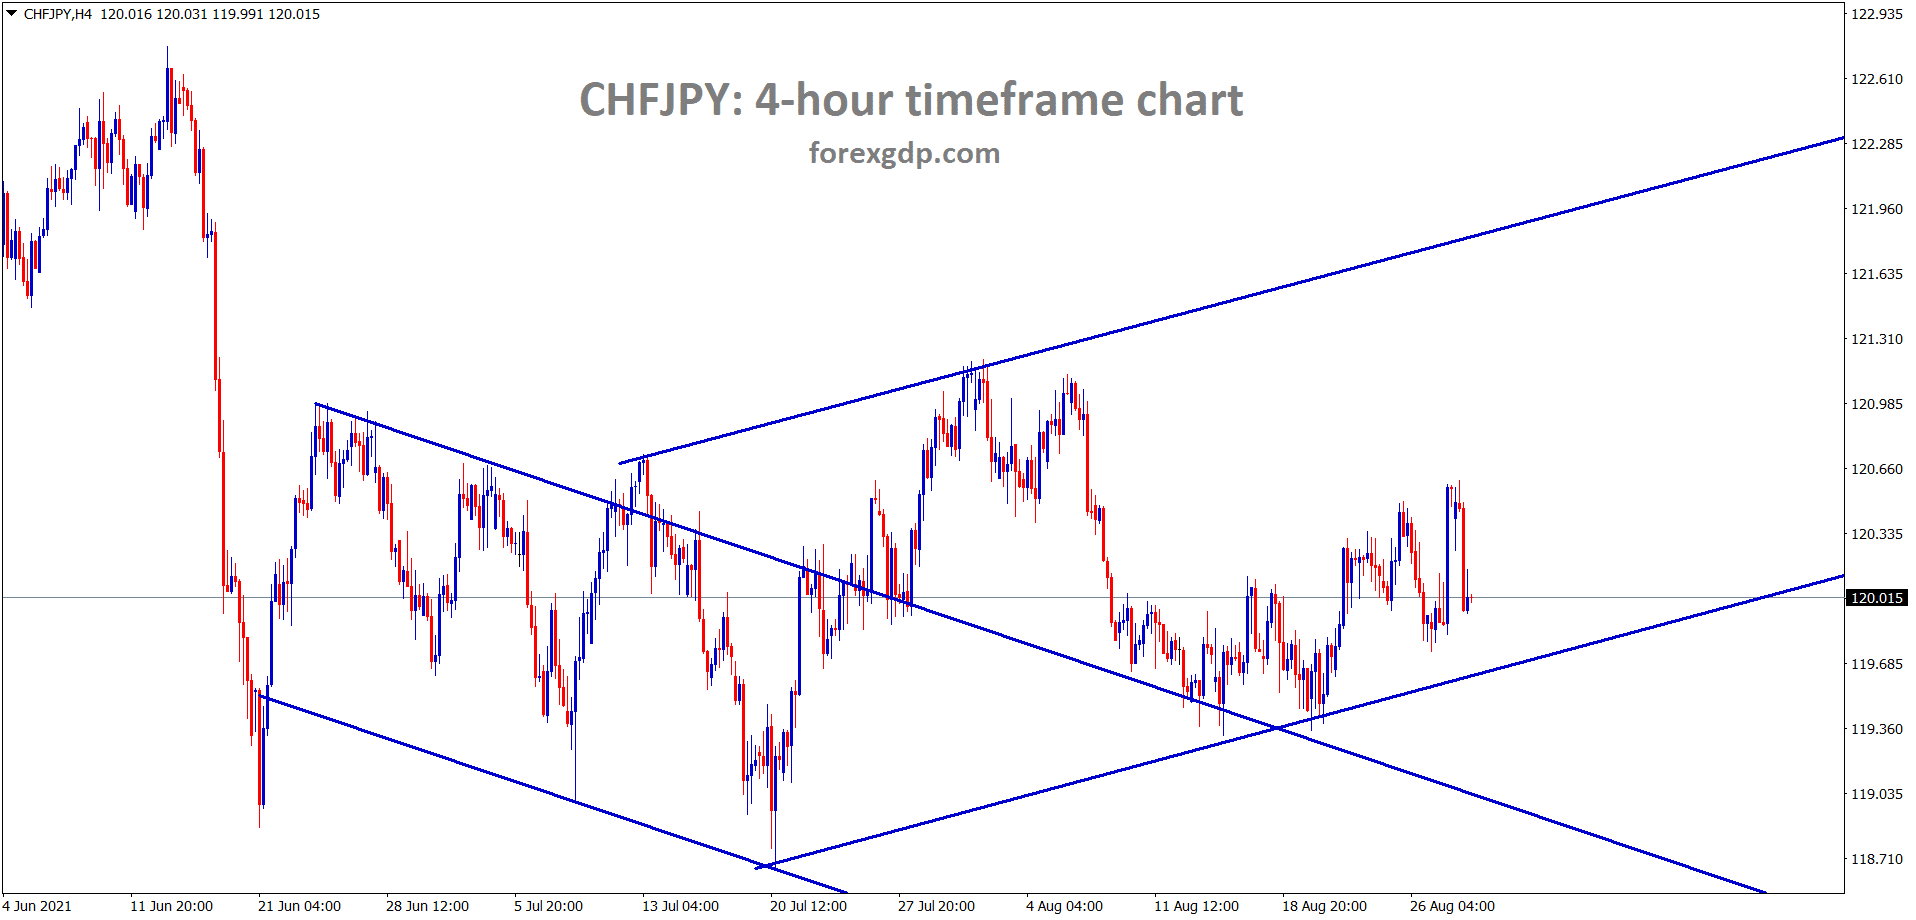 CHFJPY is consolidating between the SR levels inside the channel lines.